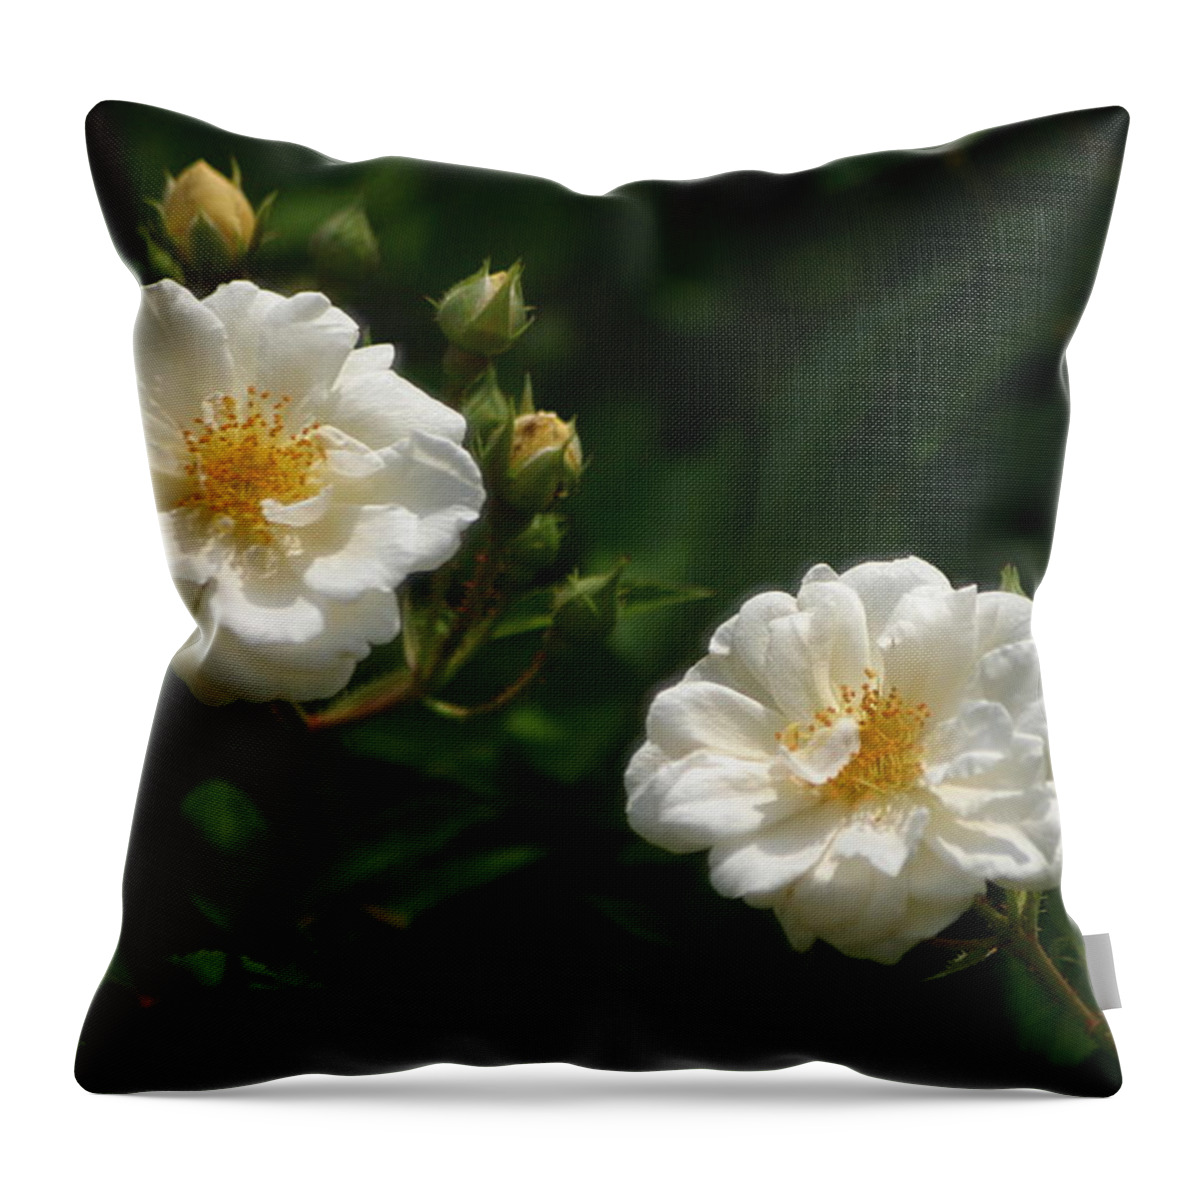 Roses Throw Pillow featuring the photograph Morning Mist by Living Color Photography Lorraine Lynch